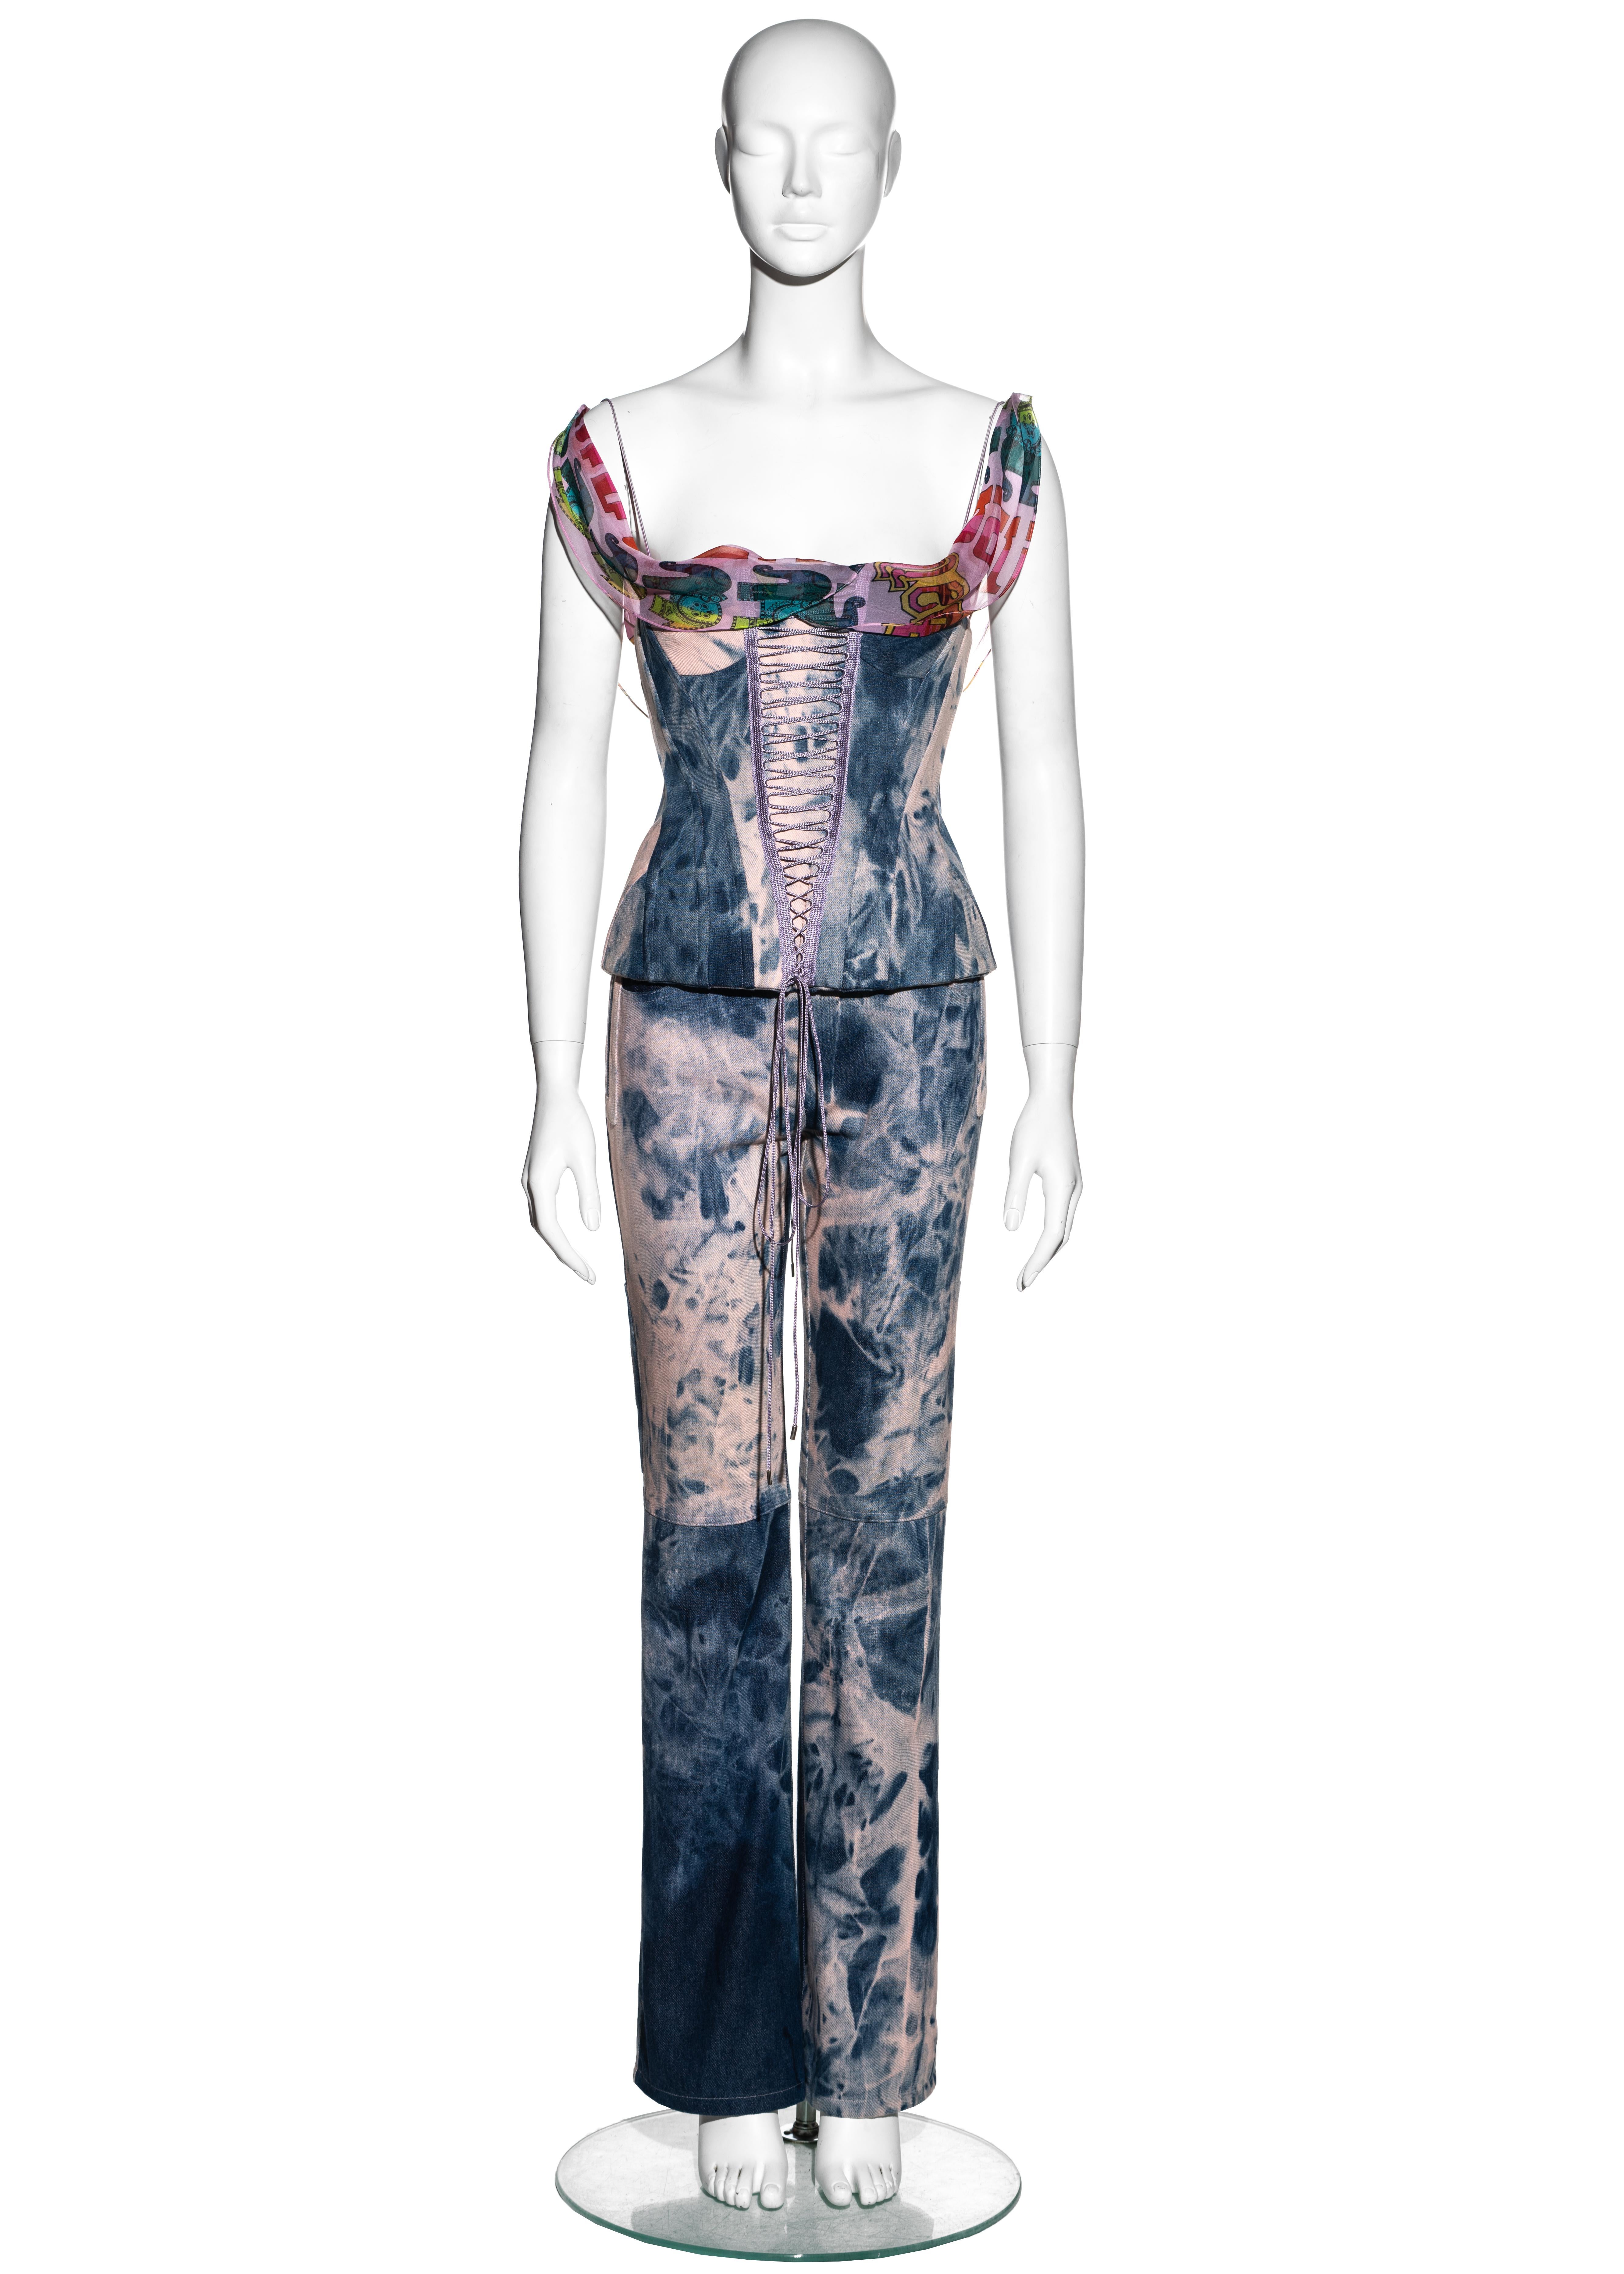 ▪ John Galliano tie dye pink and blue denim two piece set
▪ 100% Cotton, 100% Silk
▪ Off shoulder corset
▪ Silk chiffon detail around neckline and shoulders
▪ Lace up fastening at centre back 
▪ Decorative pink lacing at centre front
▪ Straight-leg